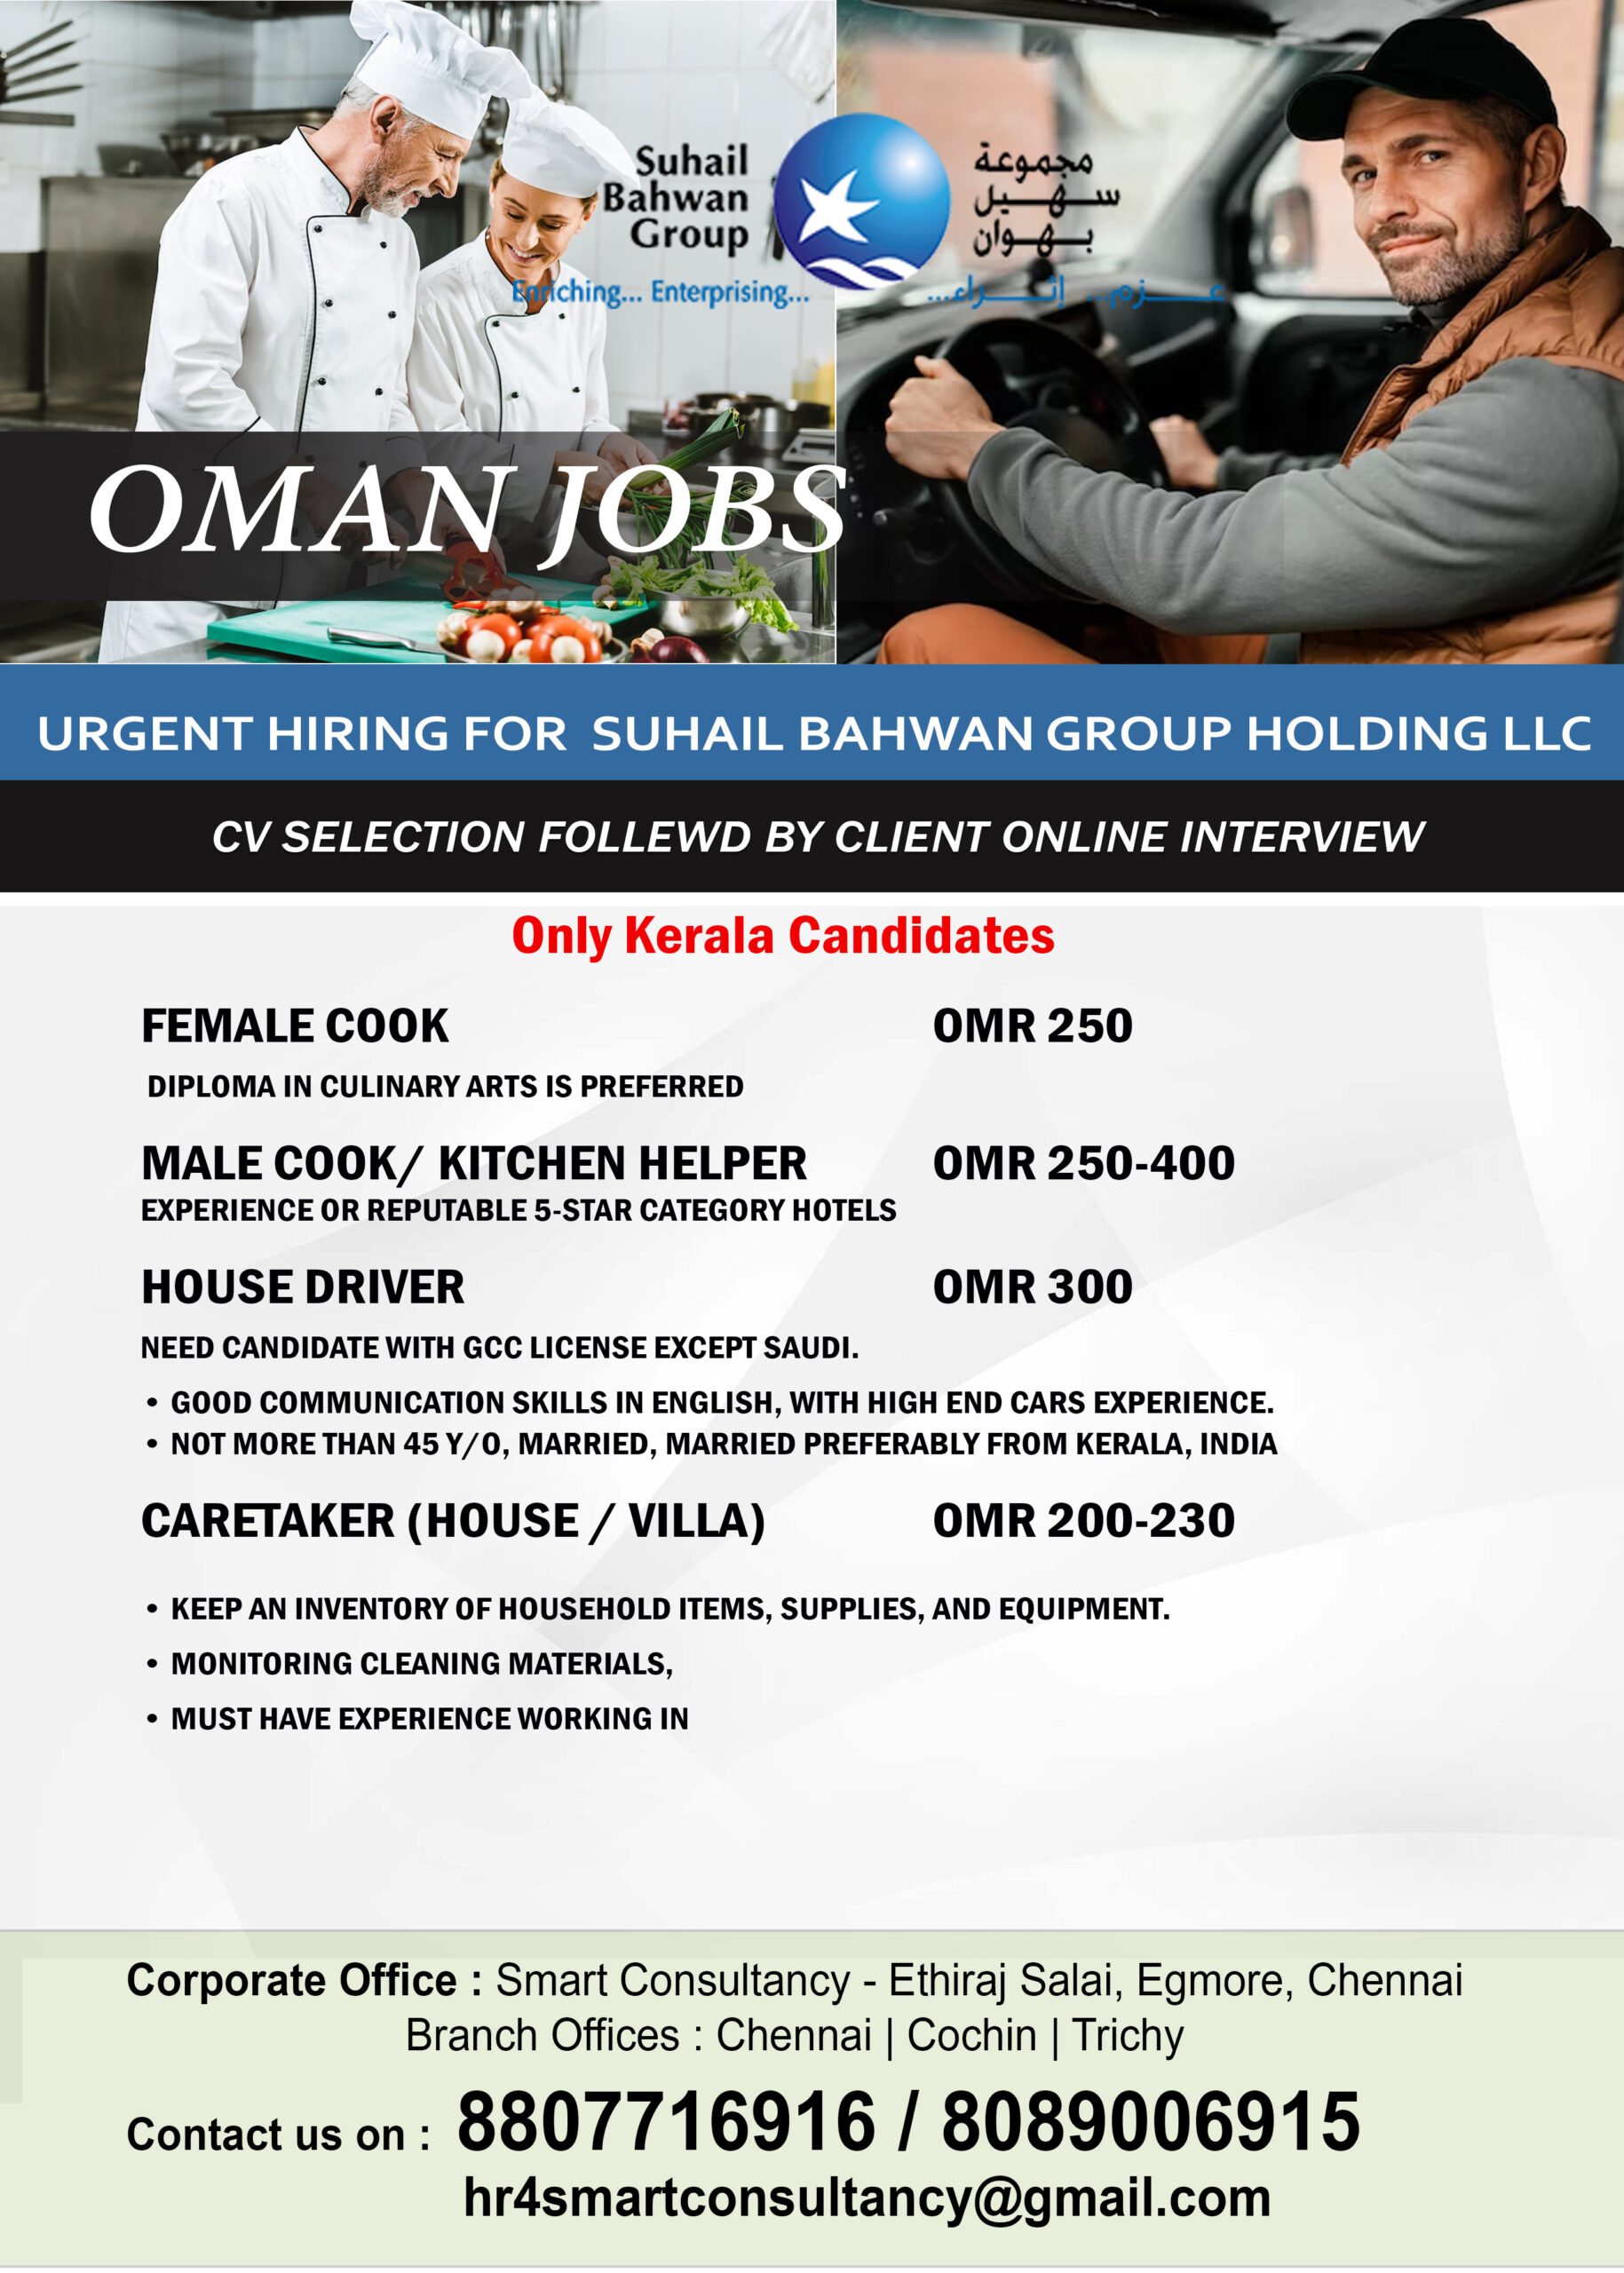 Suhail Bahwan Group Holding LLC – Oman CV SELECTION FOLLEWD BY CLIENT ONLINE INTERVIEW